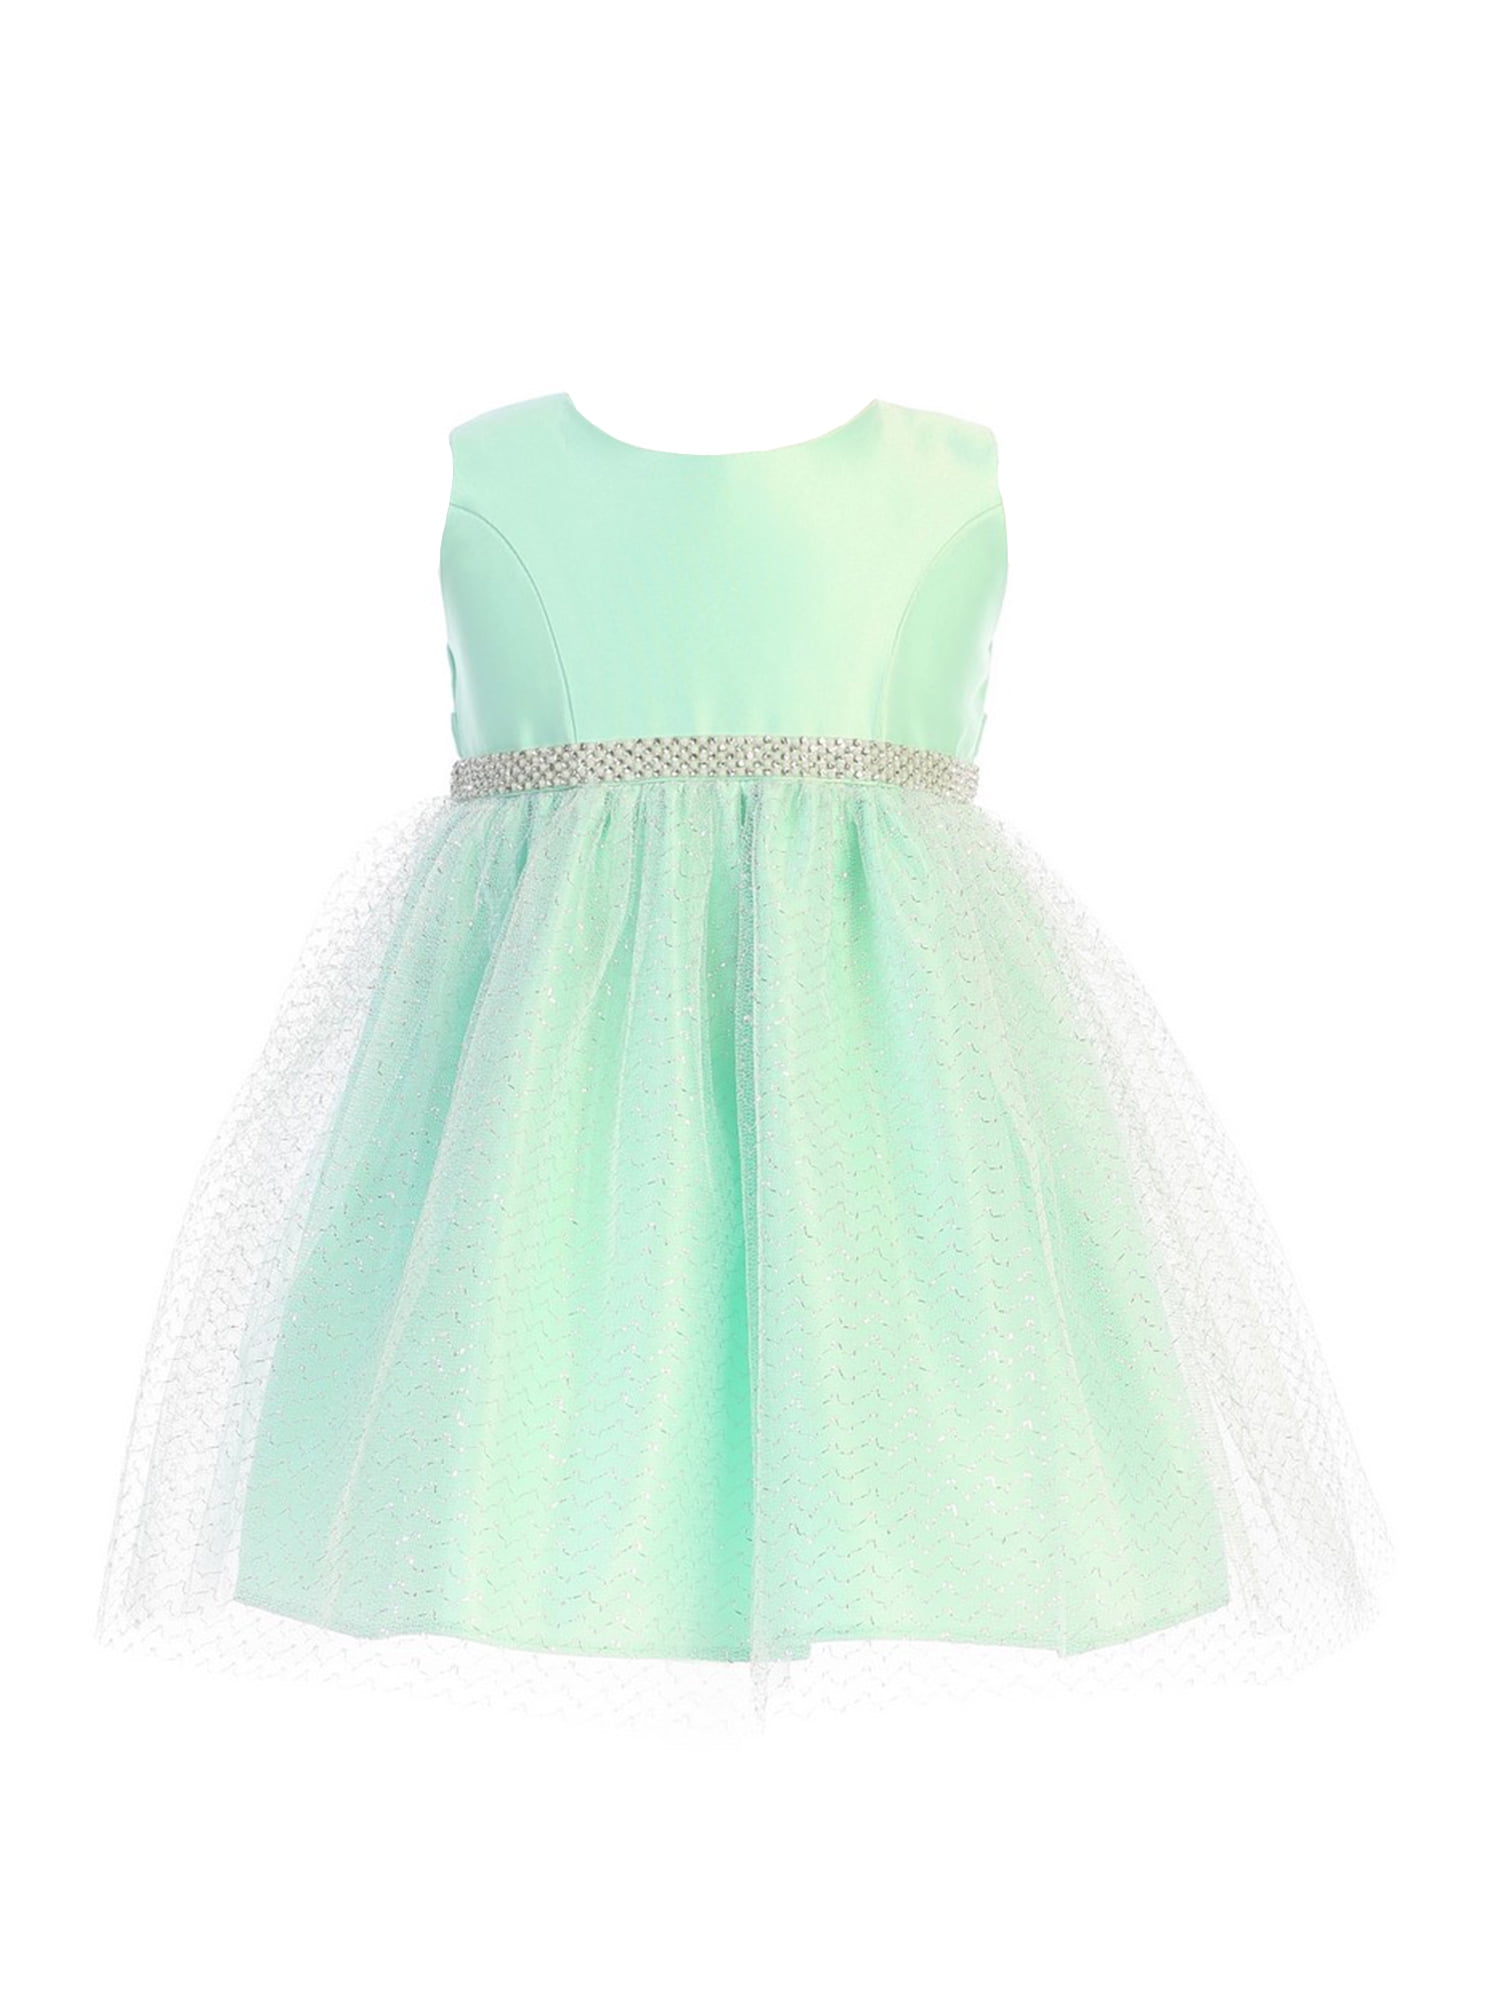 Mint Easter Dress Top Sellers, 52% OFF ...